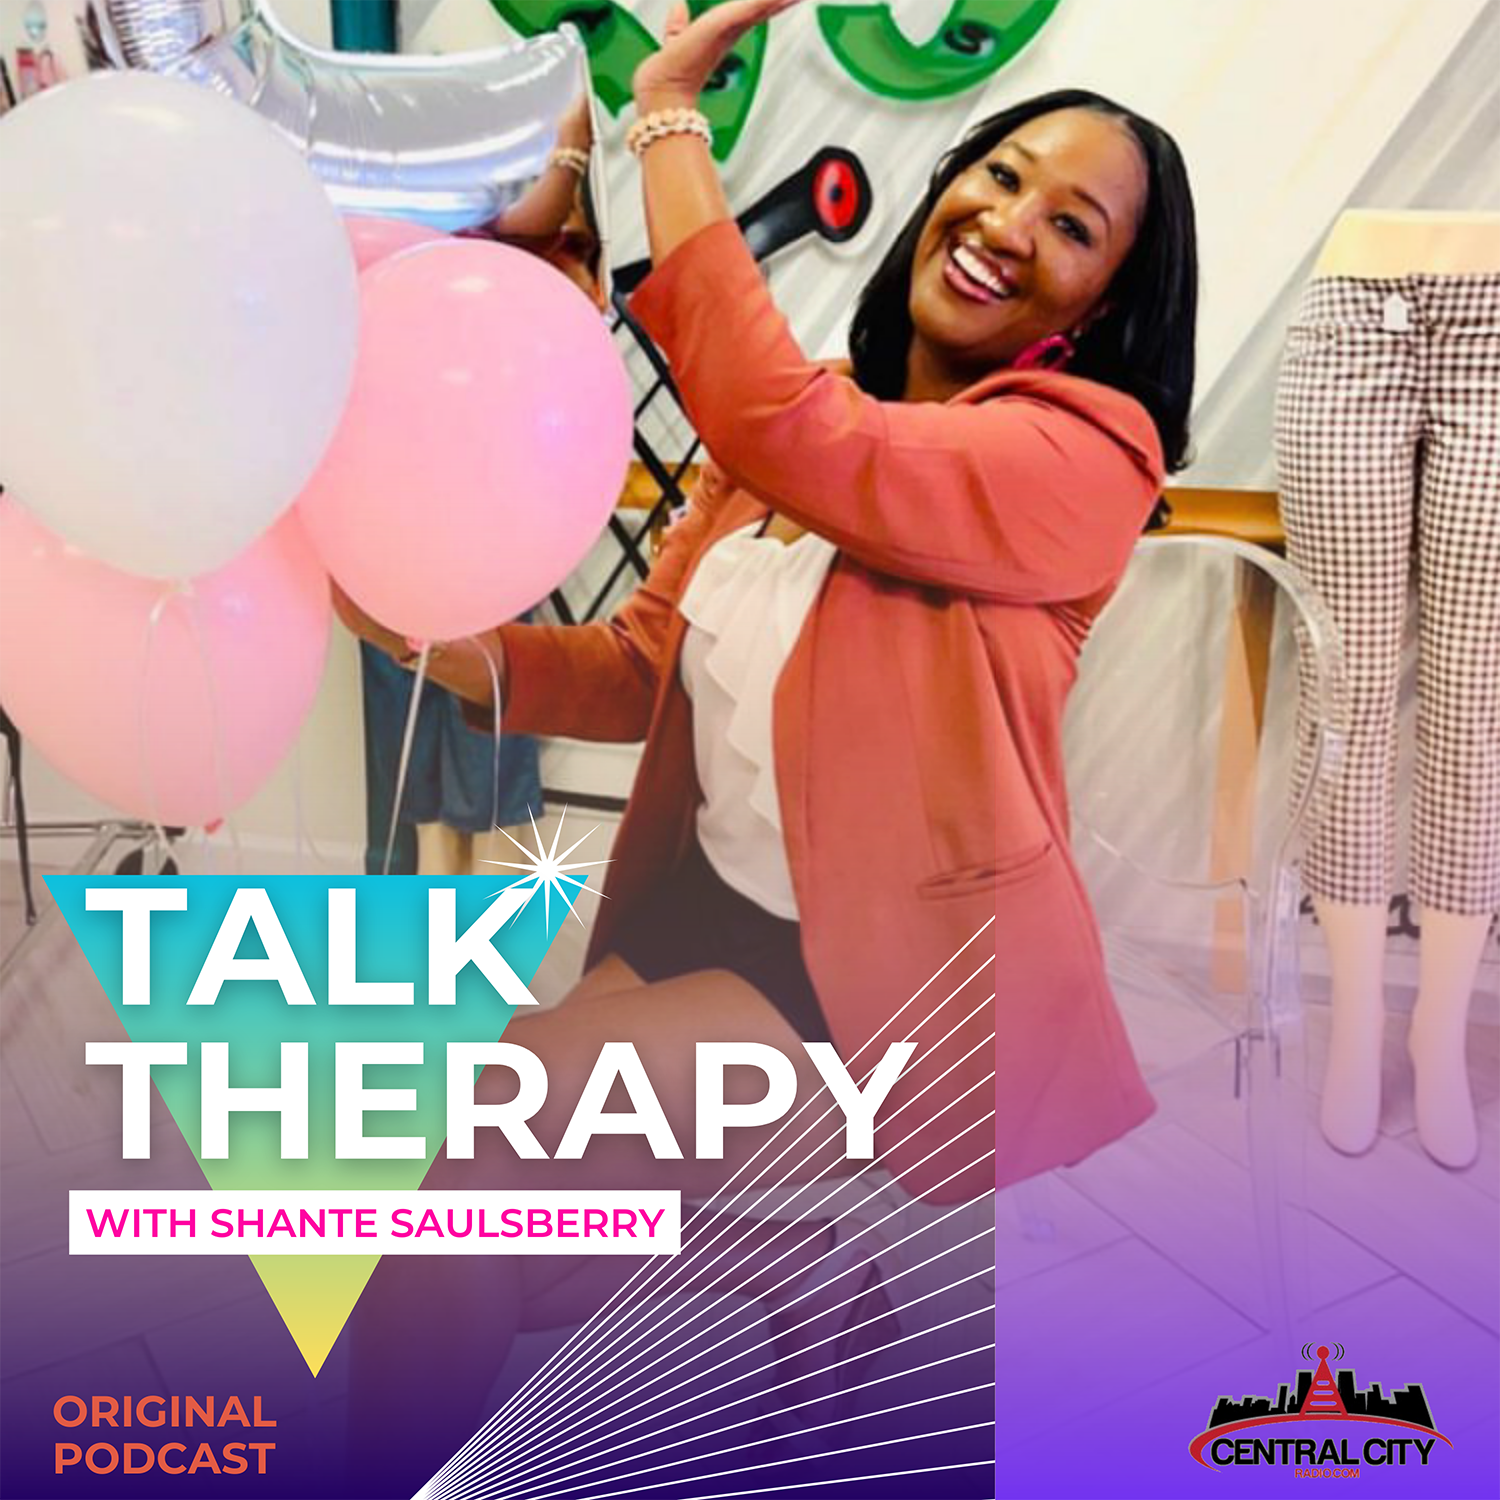 Talk Therapy with Shante Saulsberry